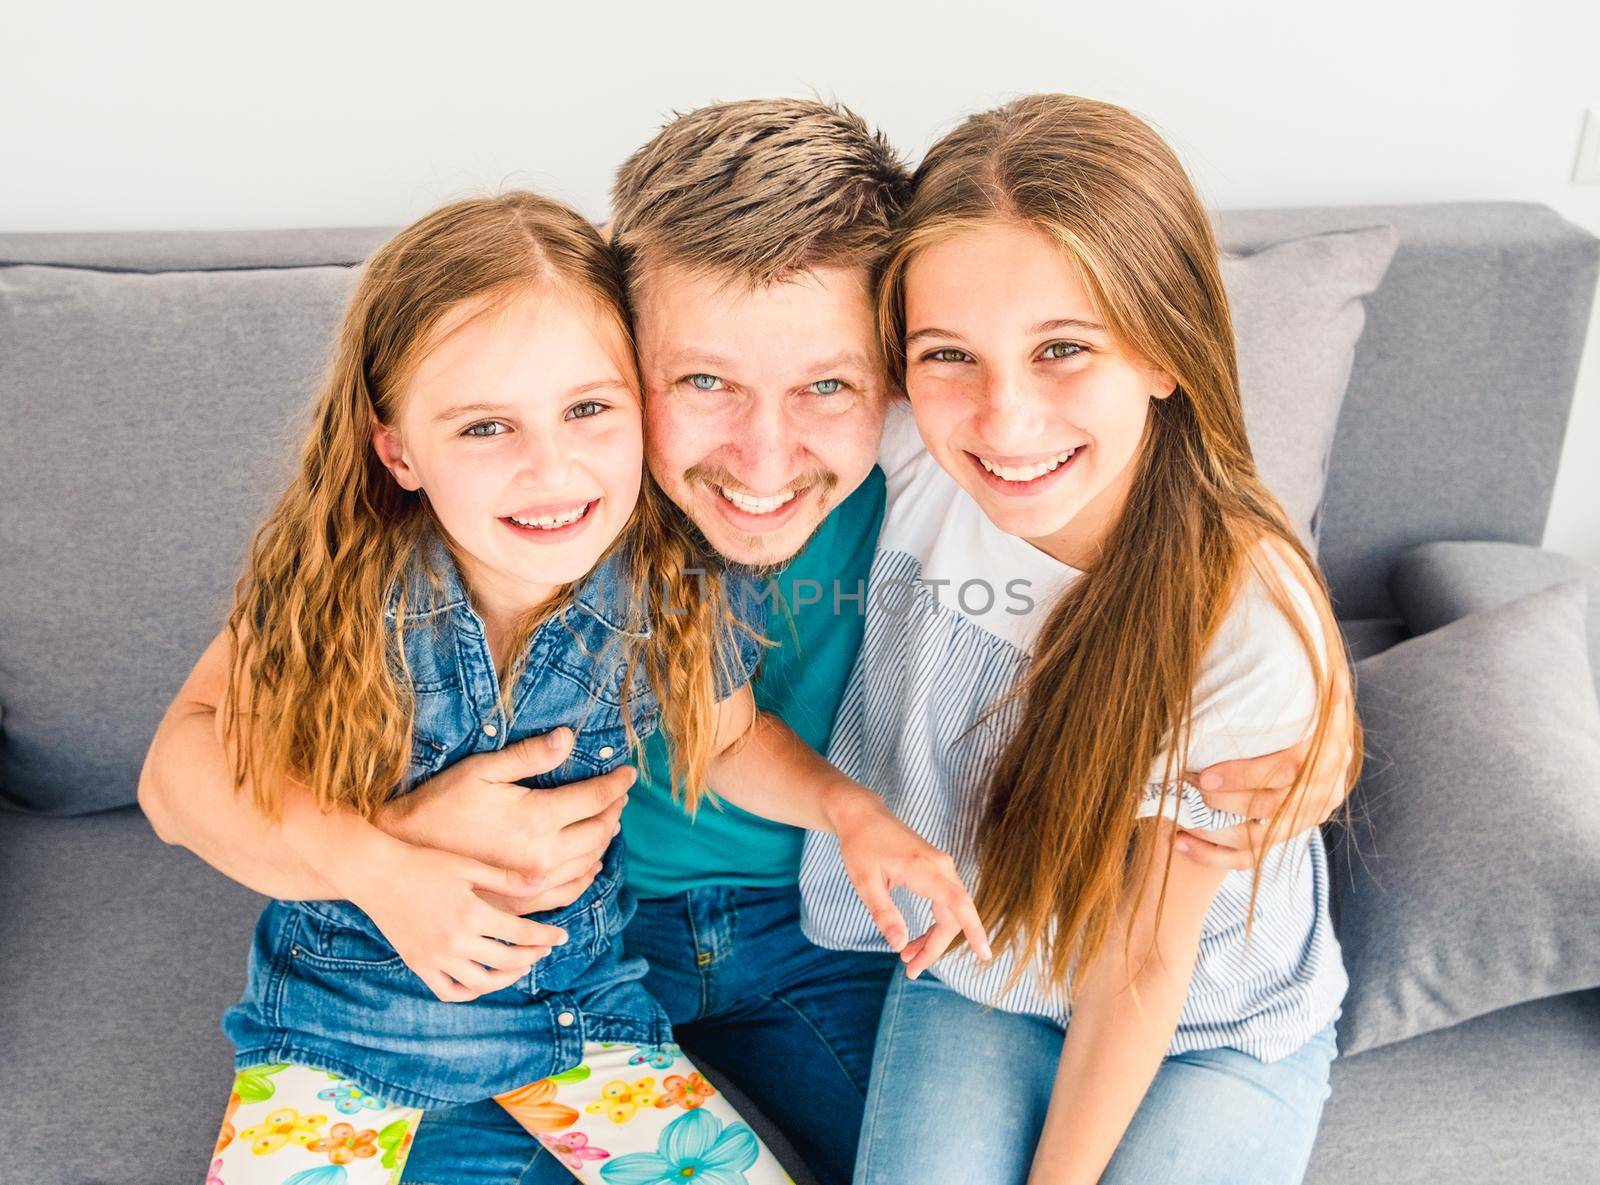 Portrait of happy father with two adorable smiling daughters on the couch